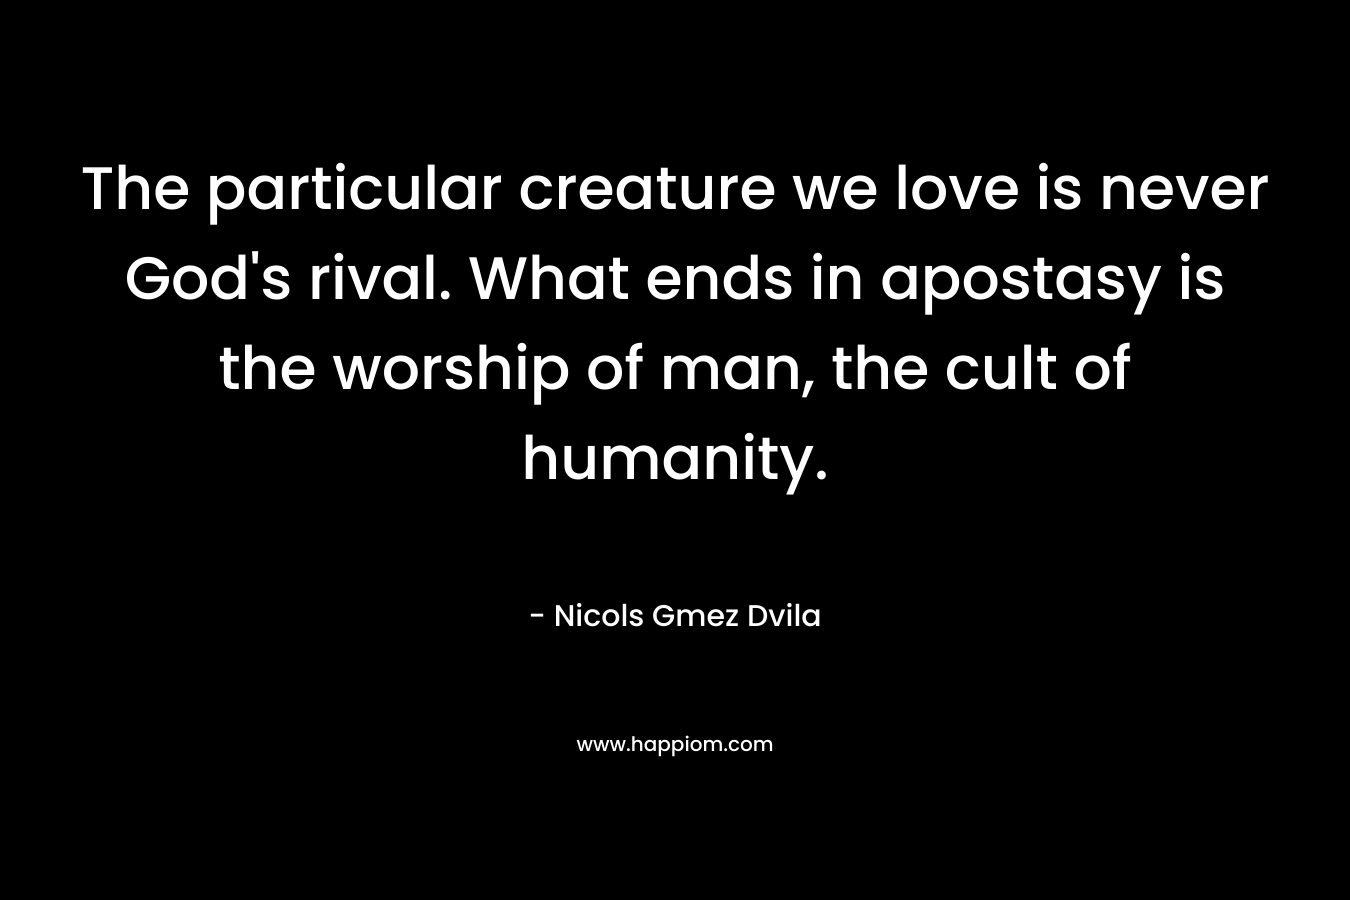 The particular creature we love is never God’s rival. What ends in apostasy is the worship of man, the cult of humanity. – Nicols Gmez Dvila